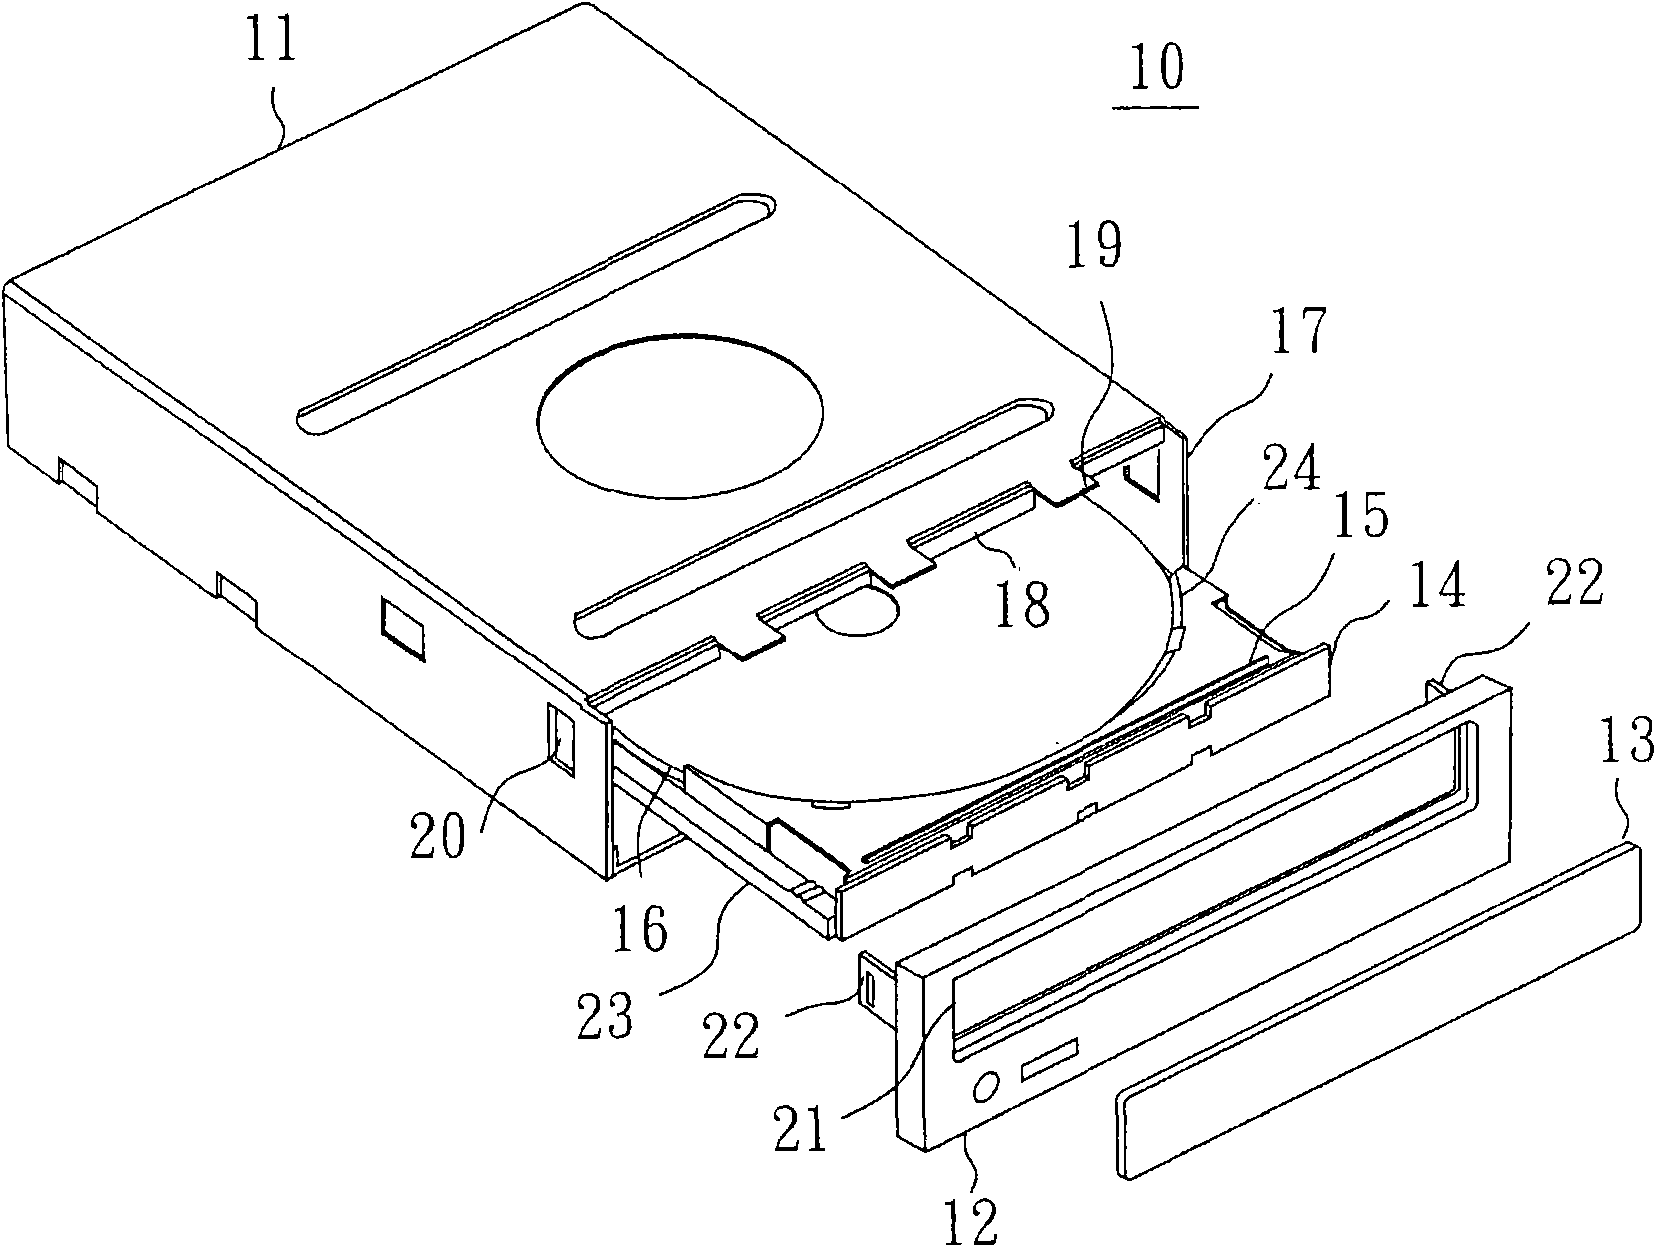 Explosion rupture disk device of CD player